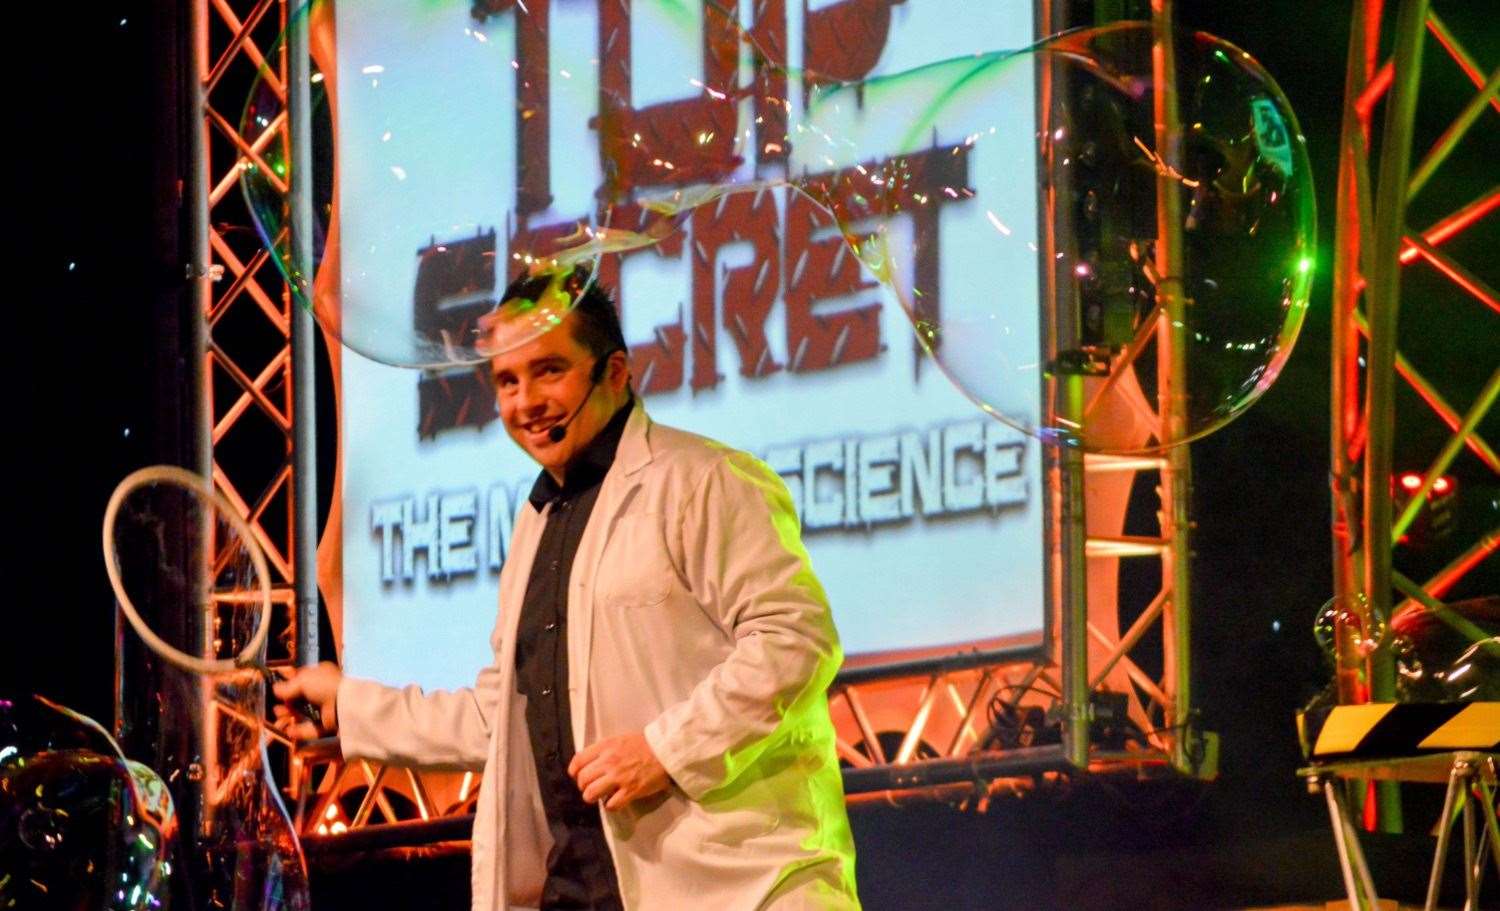 The Magic of Science will be wowing audiences at The Malthouse in Canterbury. Picture: Top Secret